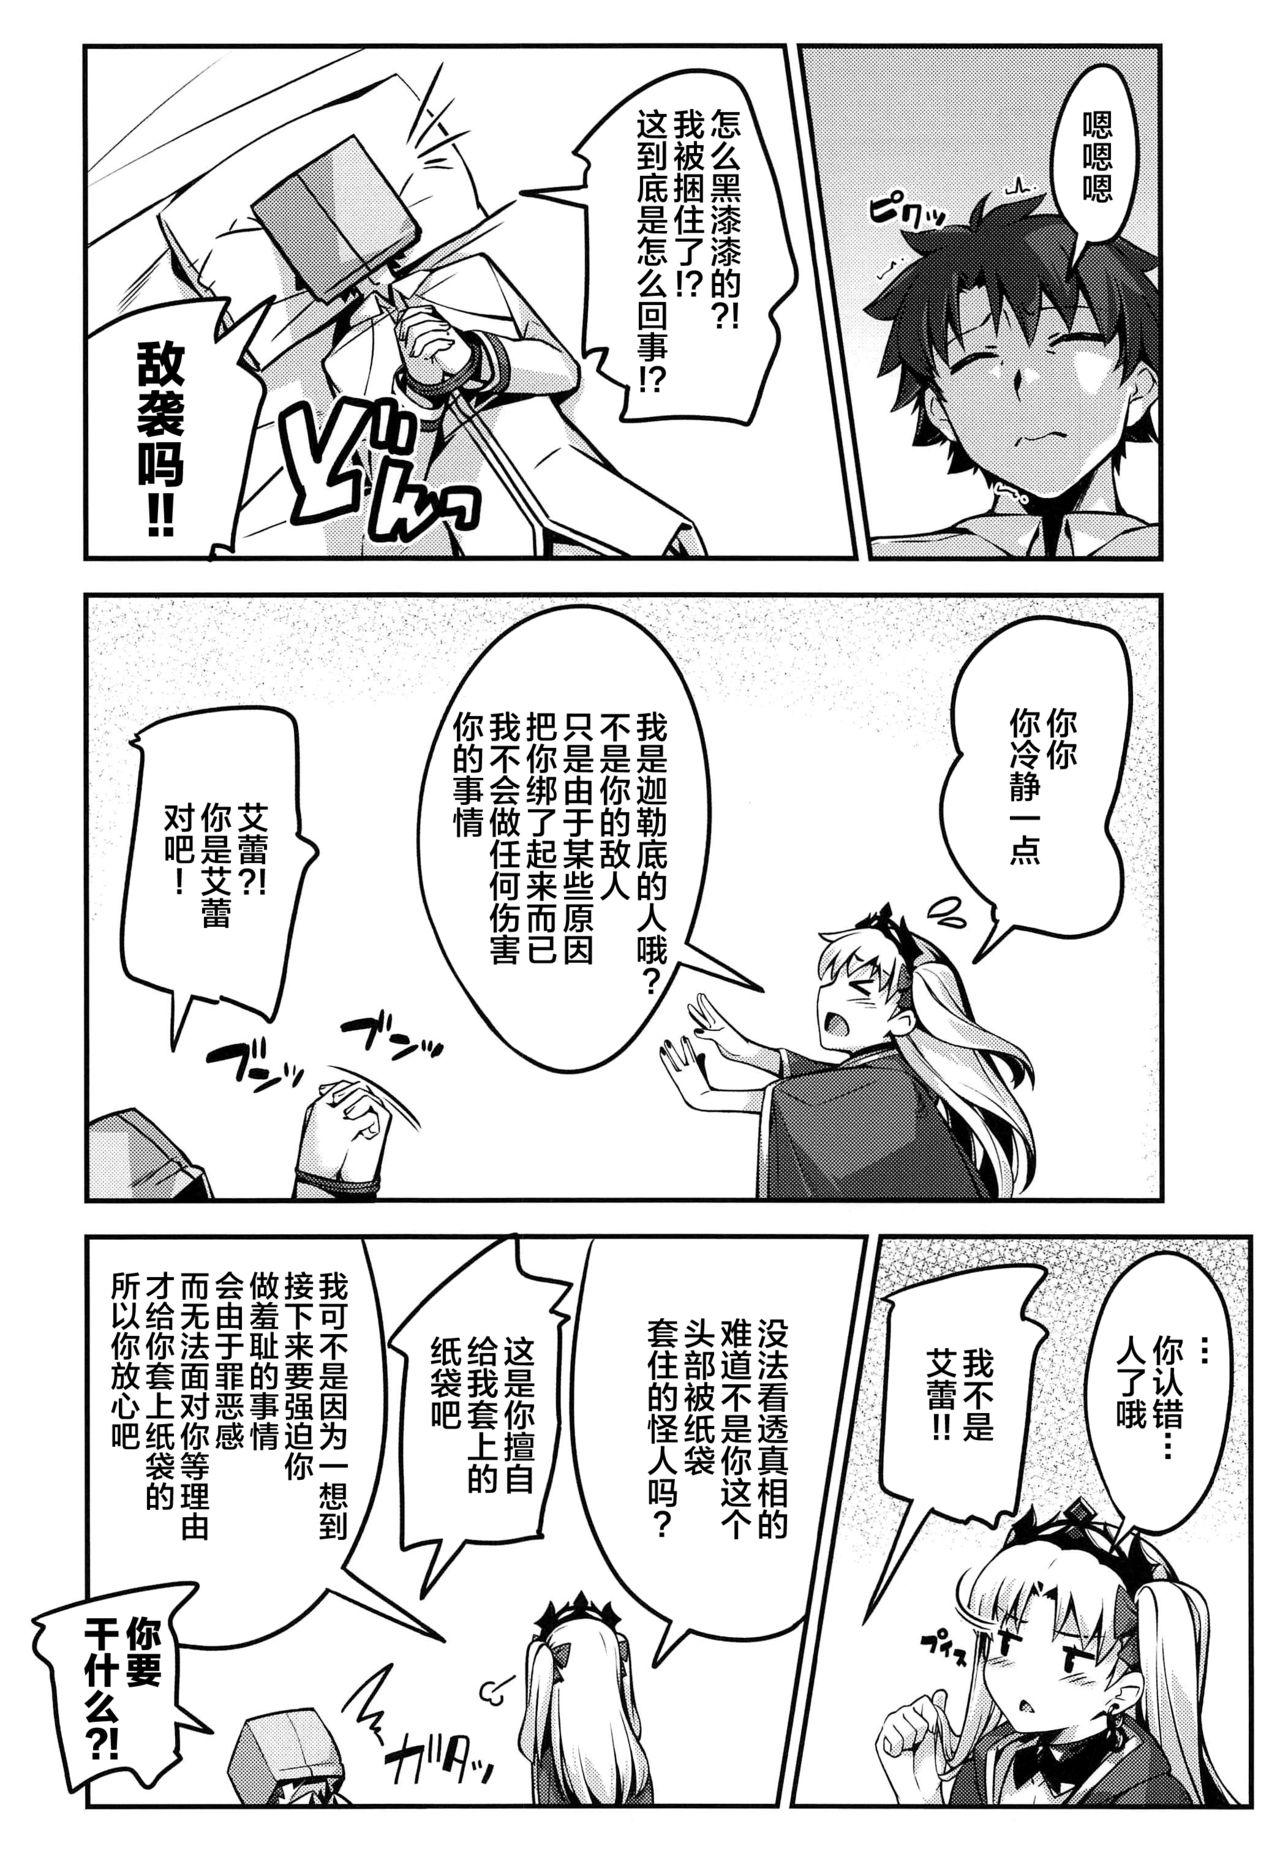 Online Hiroigui. - Fate grand order Tiny Titties - Page 7